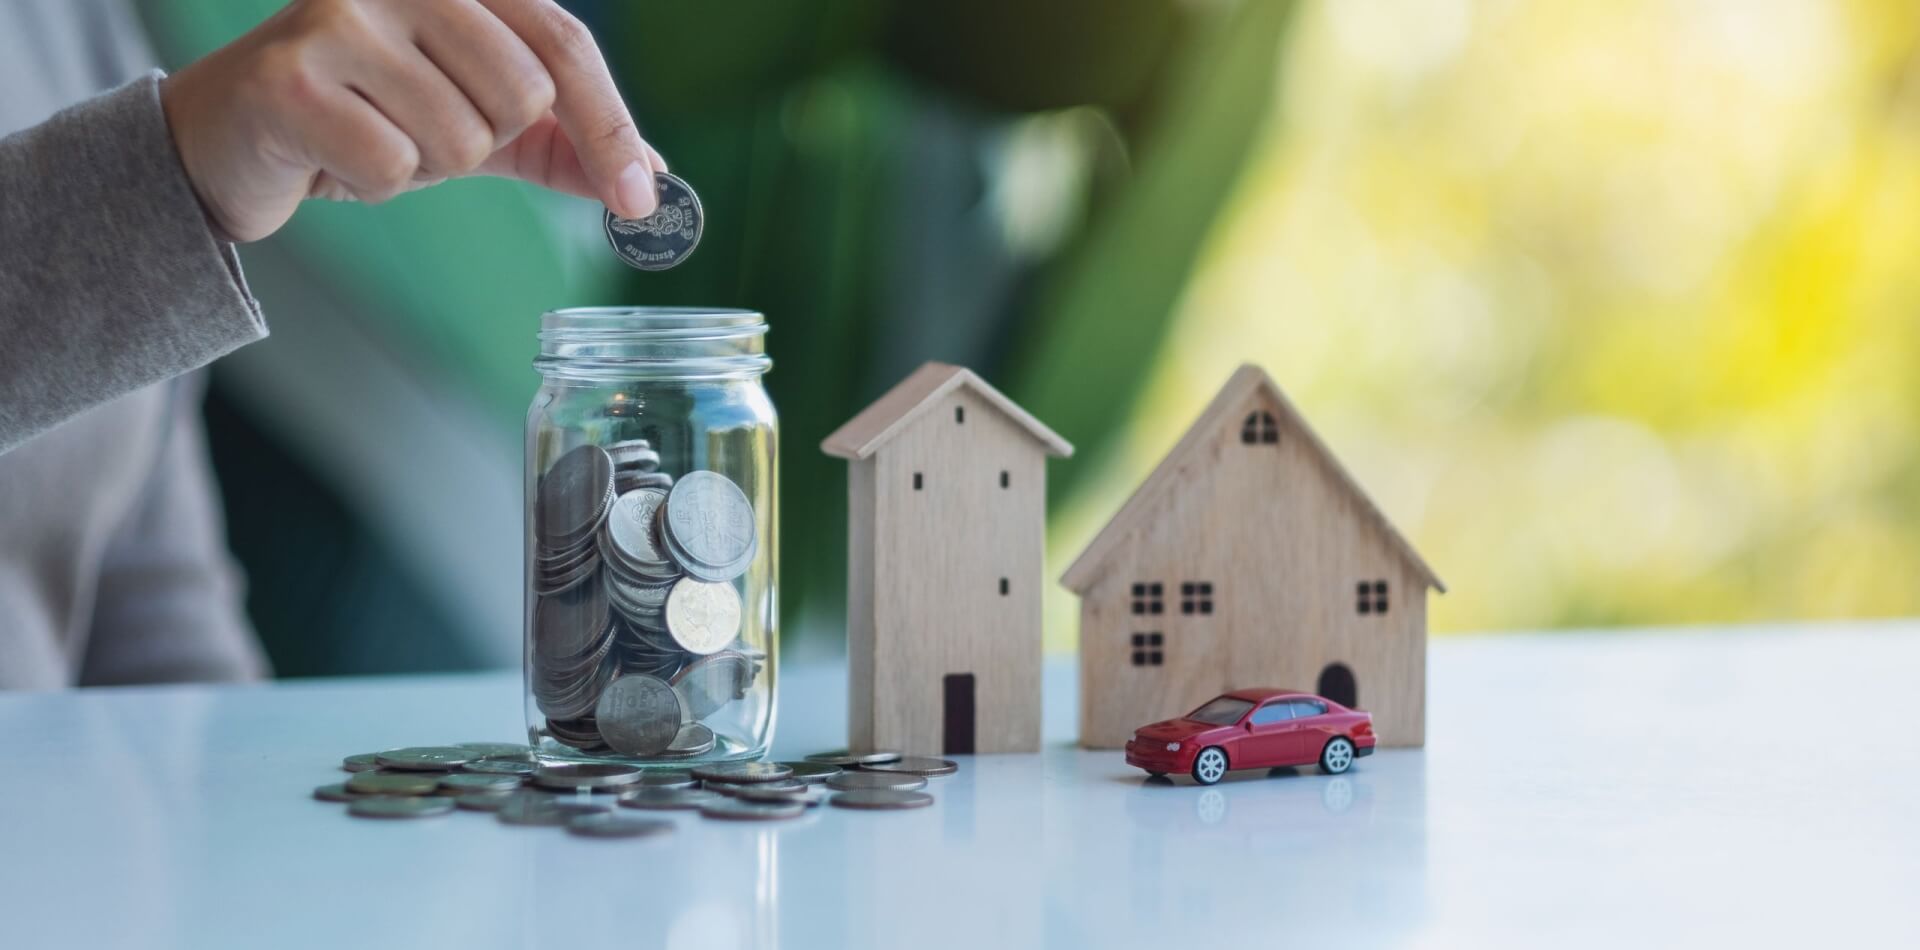 Closeup image of a woman collecting and putting coins in a glass jar with wooden house models and car figure model for saving money concept